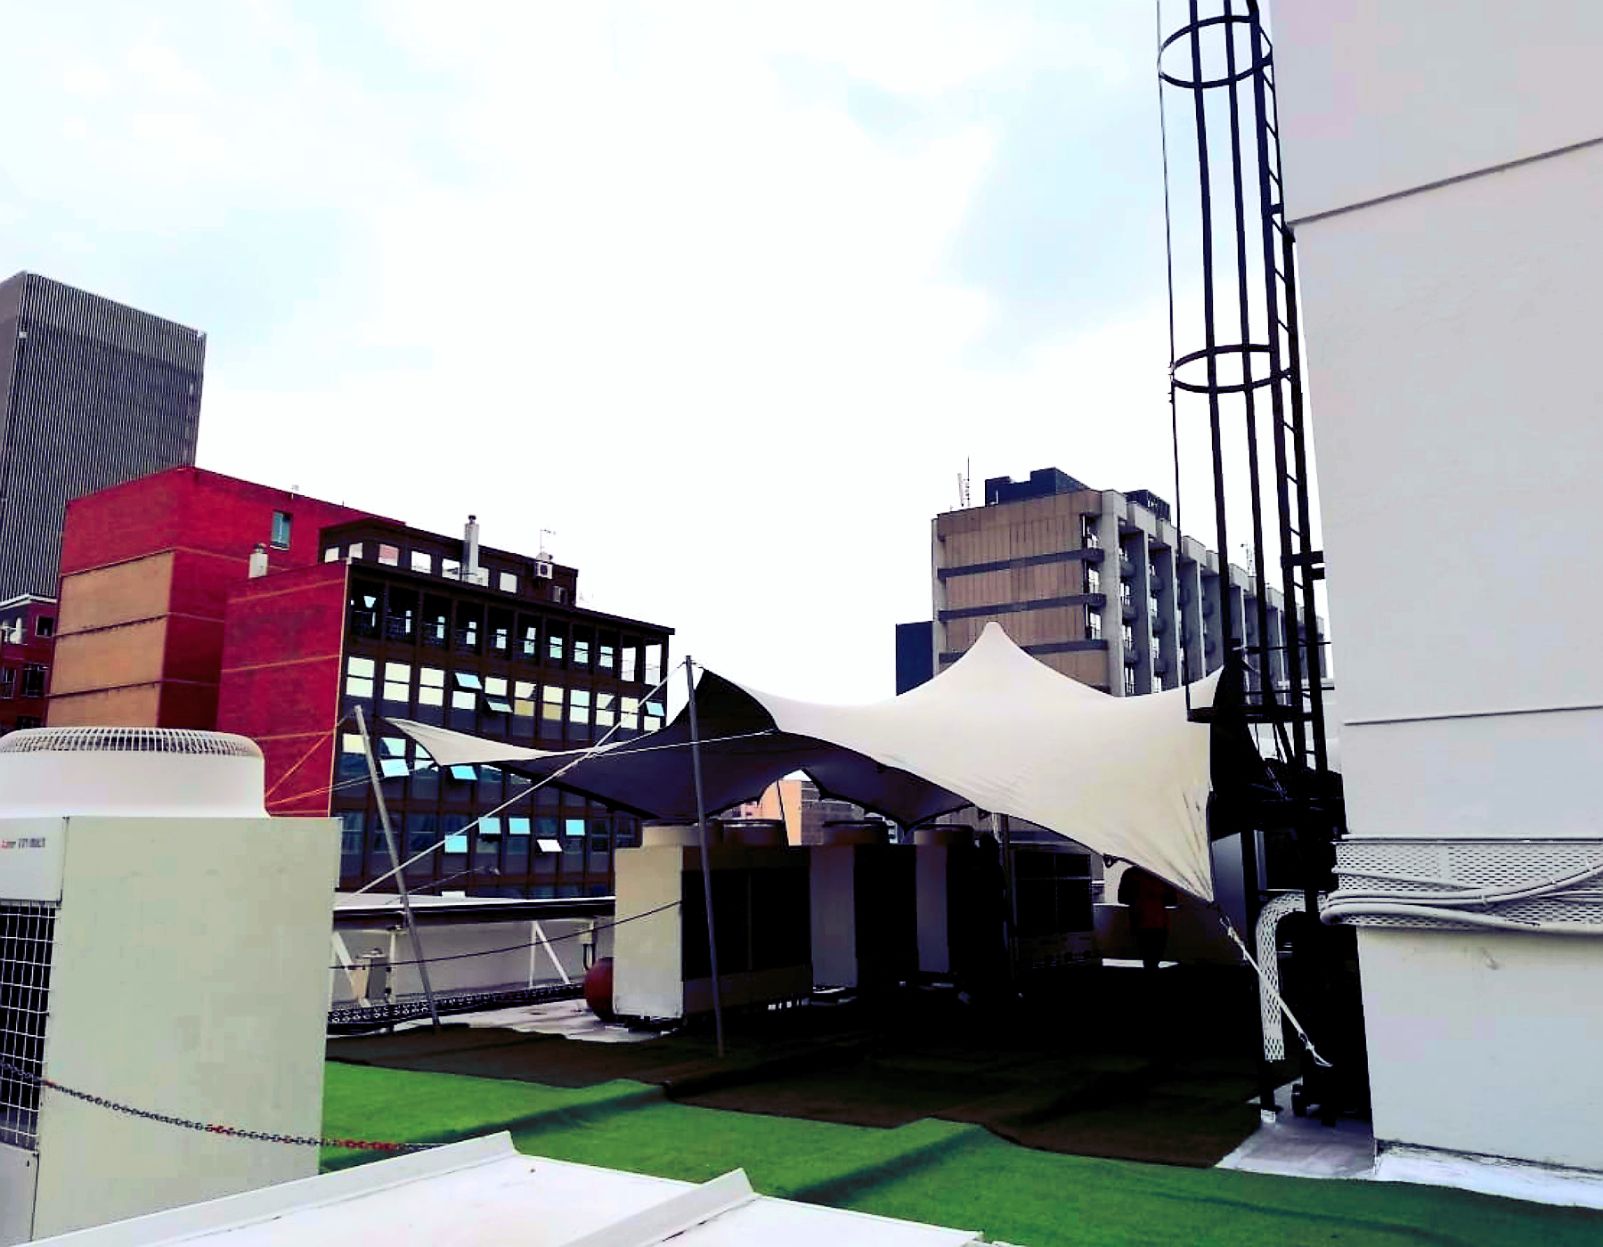 Grey Tent Erected On A Rooftop In Between Buildings With Green Turf.